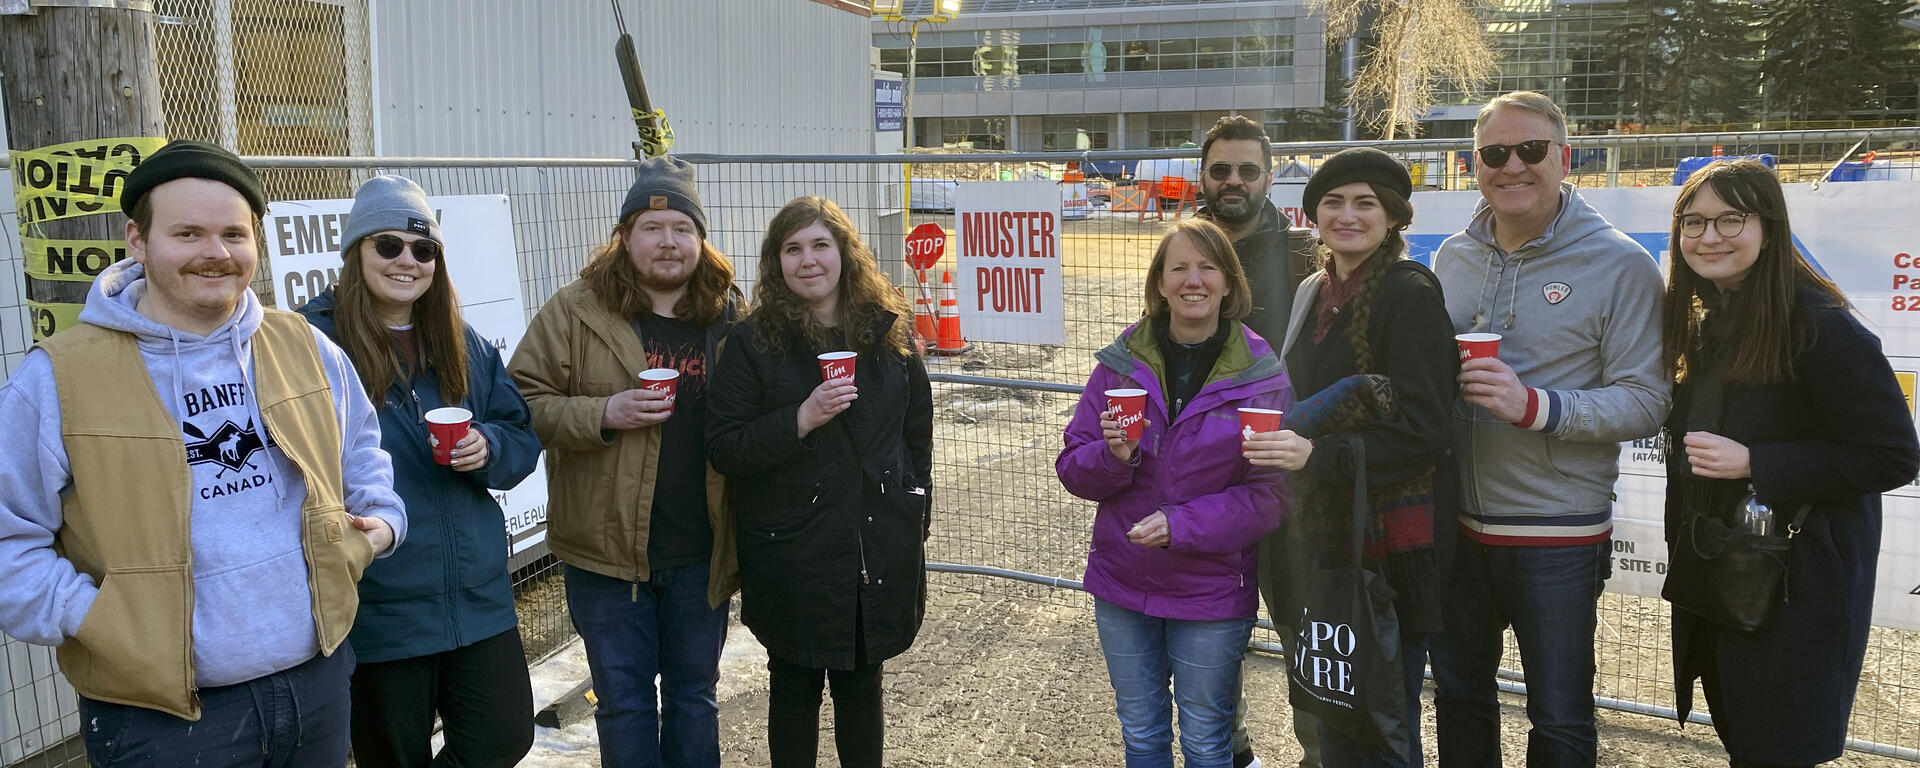 Crew of researchers on site for Exposure festival. They all hold Tim Horton's cups and smile at the camera